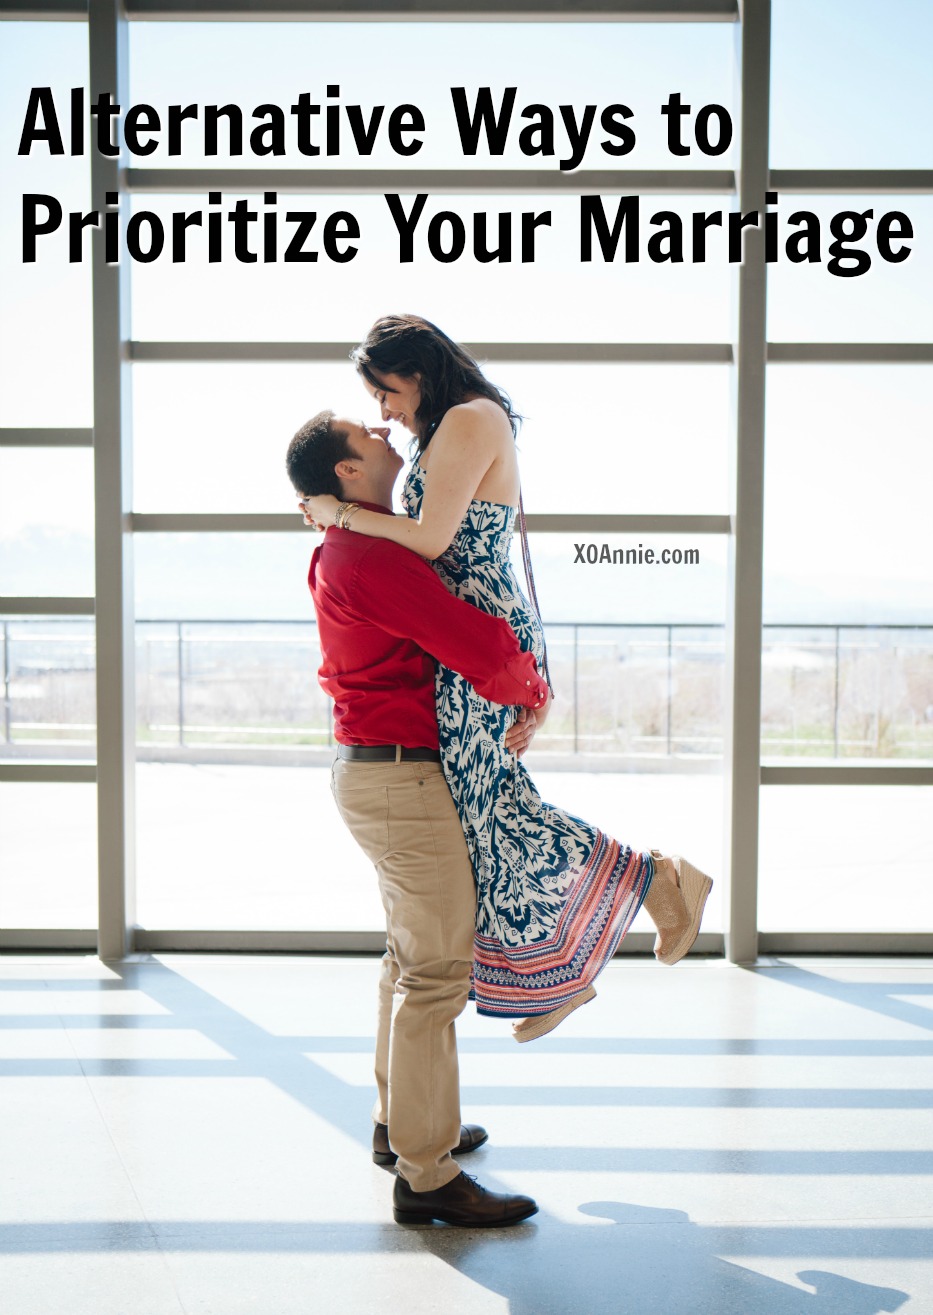 Alternative Ways to Prioritize Your Marriage